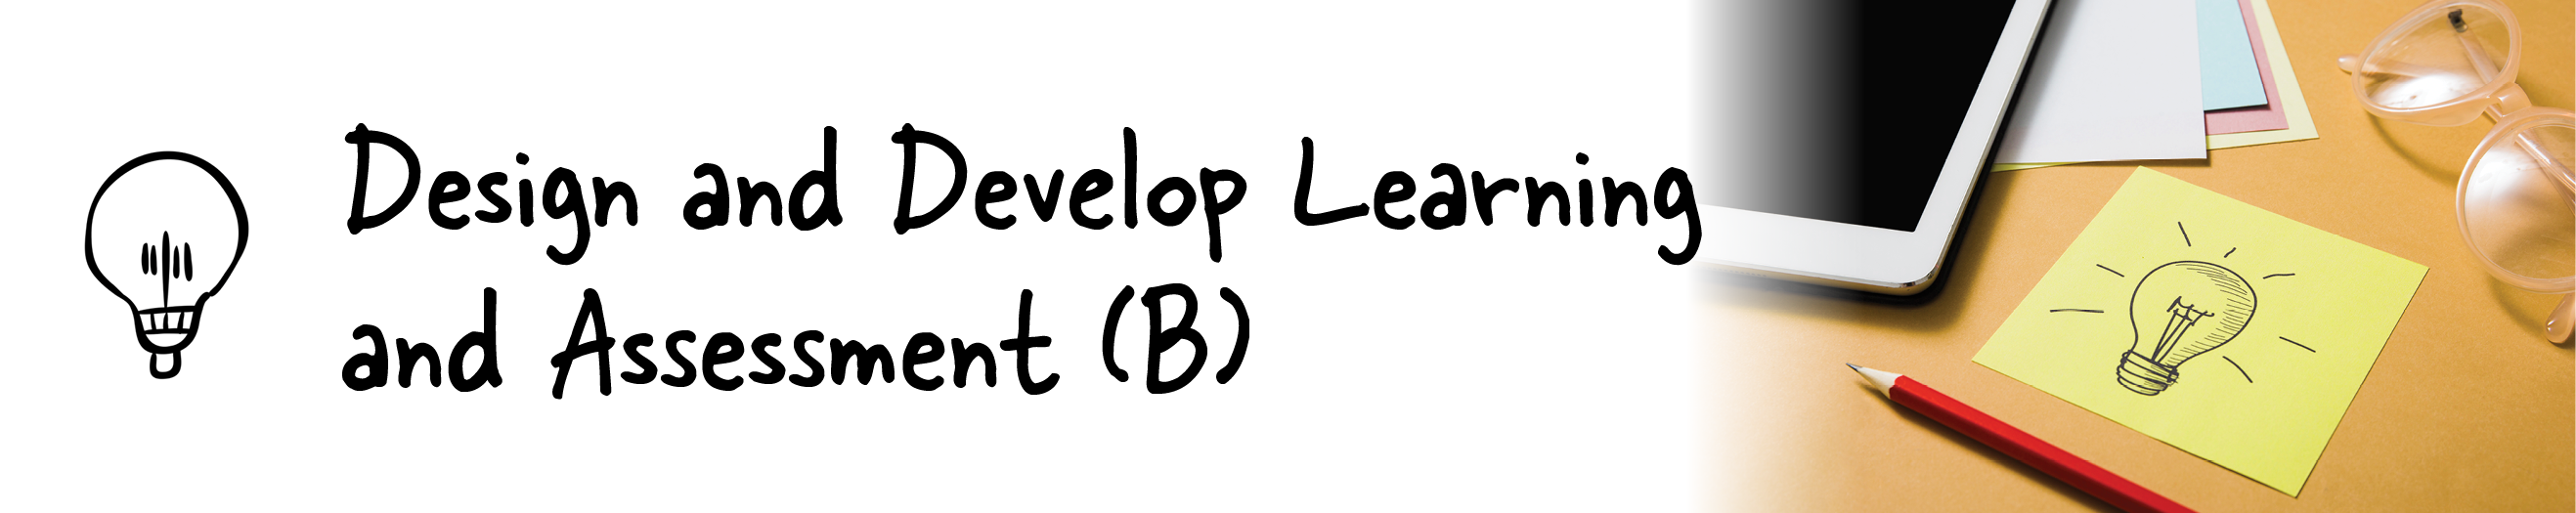 Design and Develop Learning and Assessment (B)